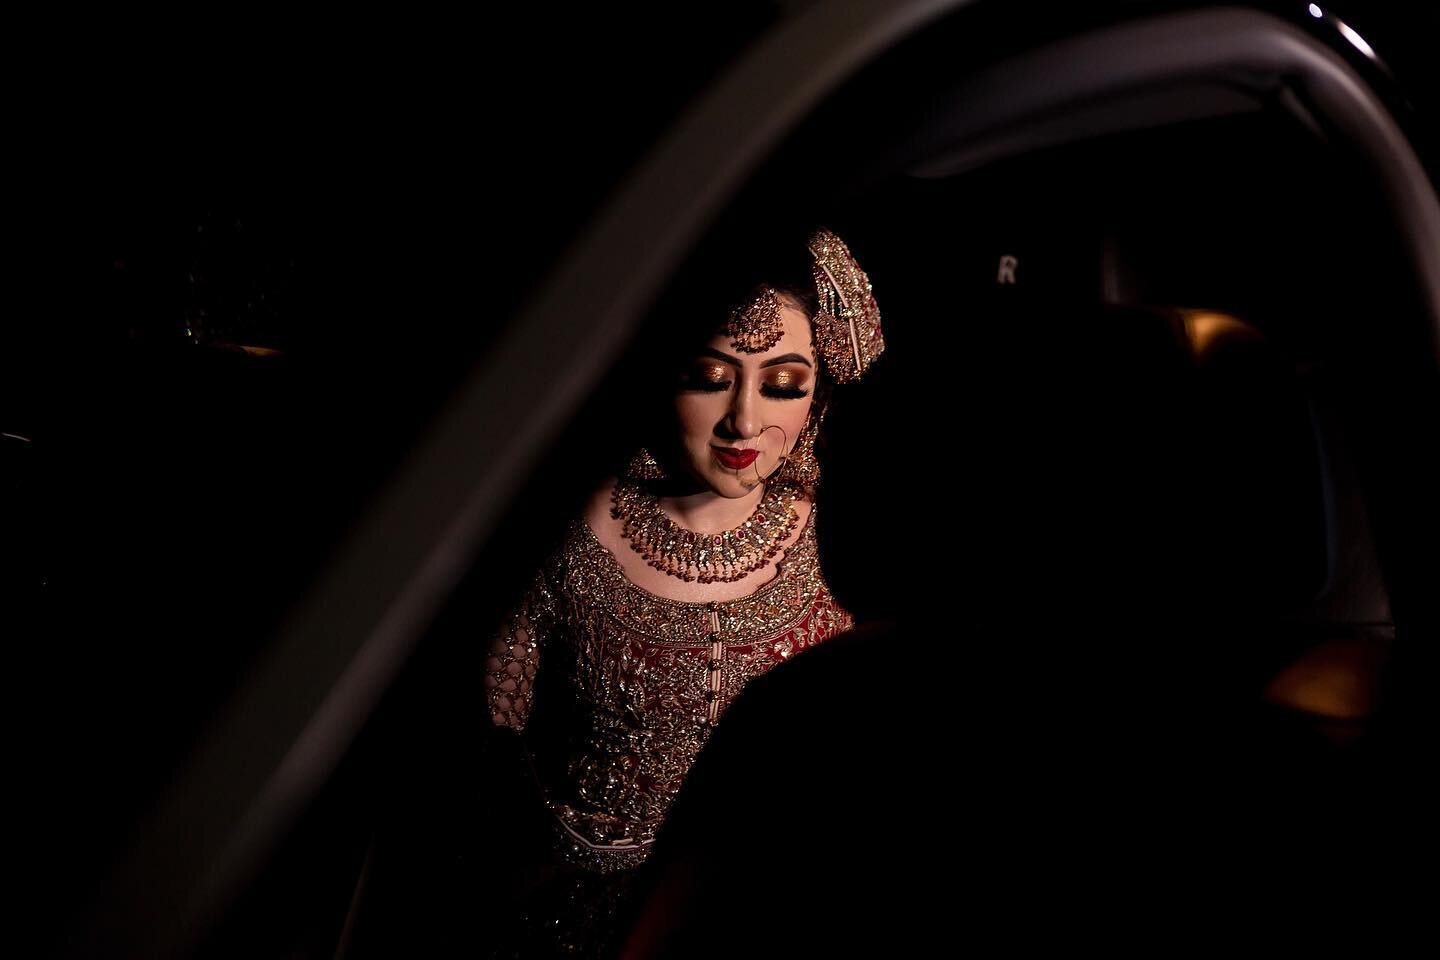 &ldquo;When I saw you I fell in love, and you smiled because you knew.&rdquo;

An evening wedding, with an evening glaze of our lovely bride Faiza. Evening weddings are more relaxed away from the hustle and bustle of time. Congratulations to both Ame